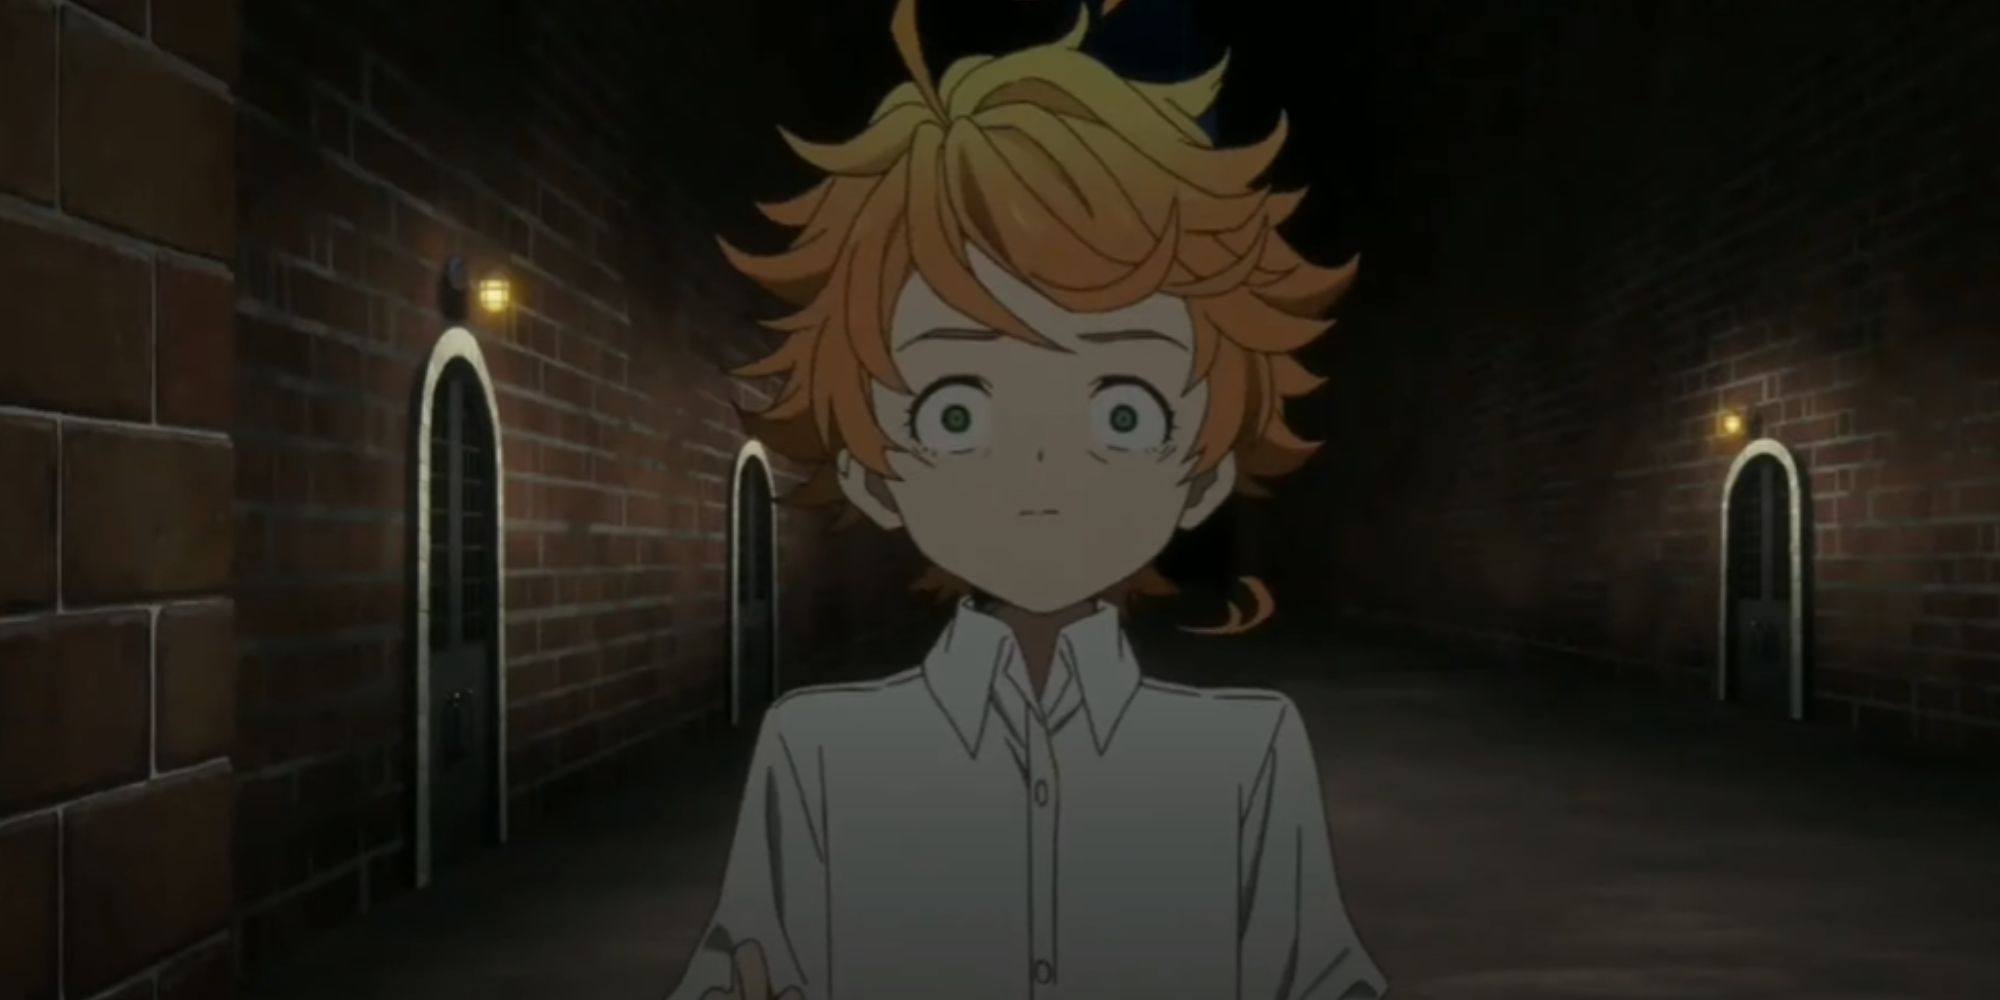 Emma terrified at Conny’s death in The Promised Neverland